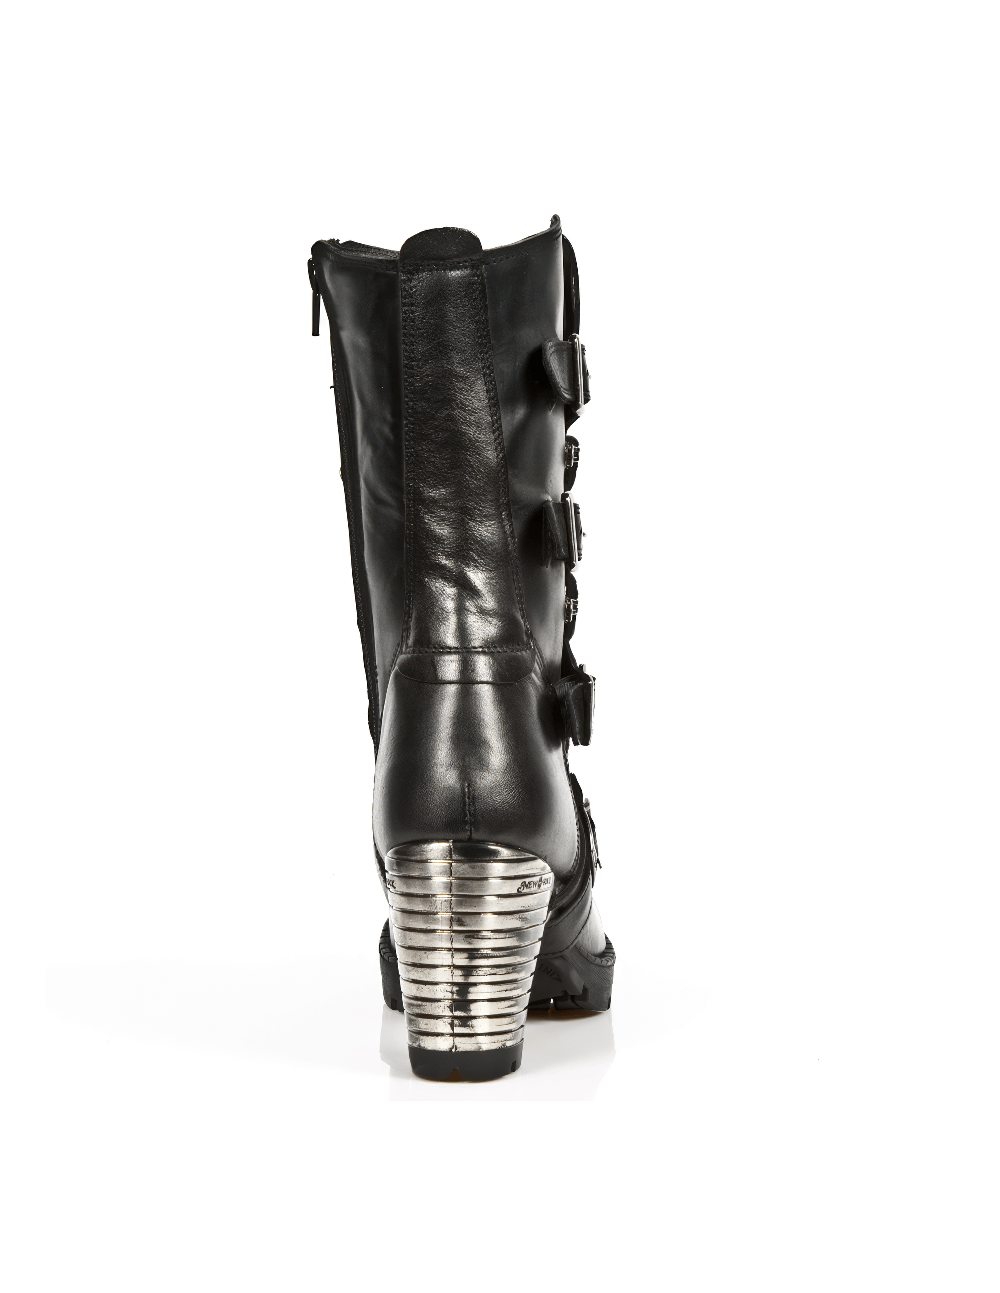 NEW ROCK Gothic Buckled Ankle Boots with Metallic Accents